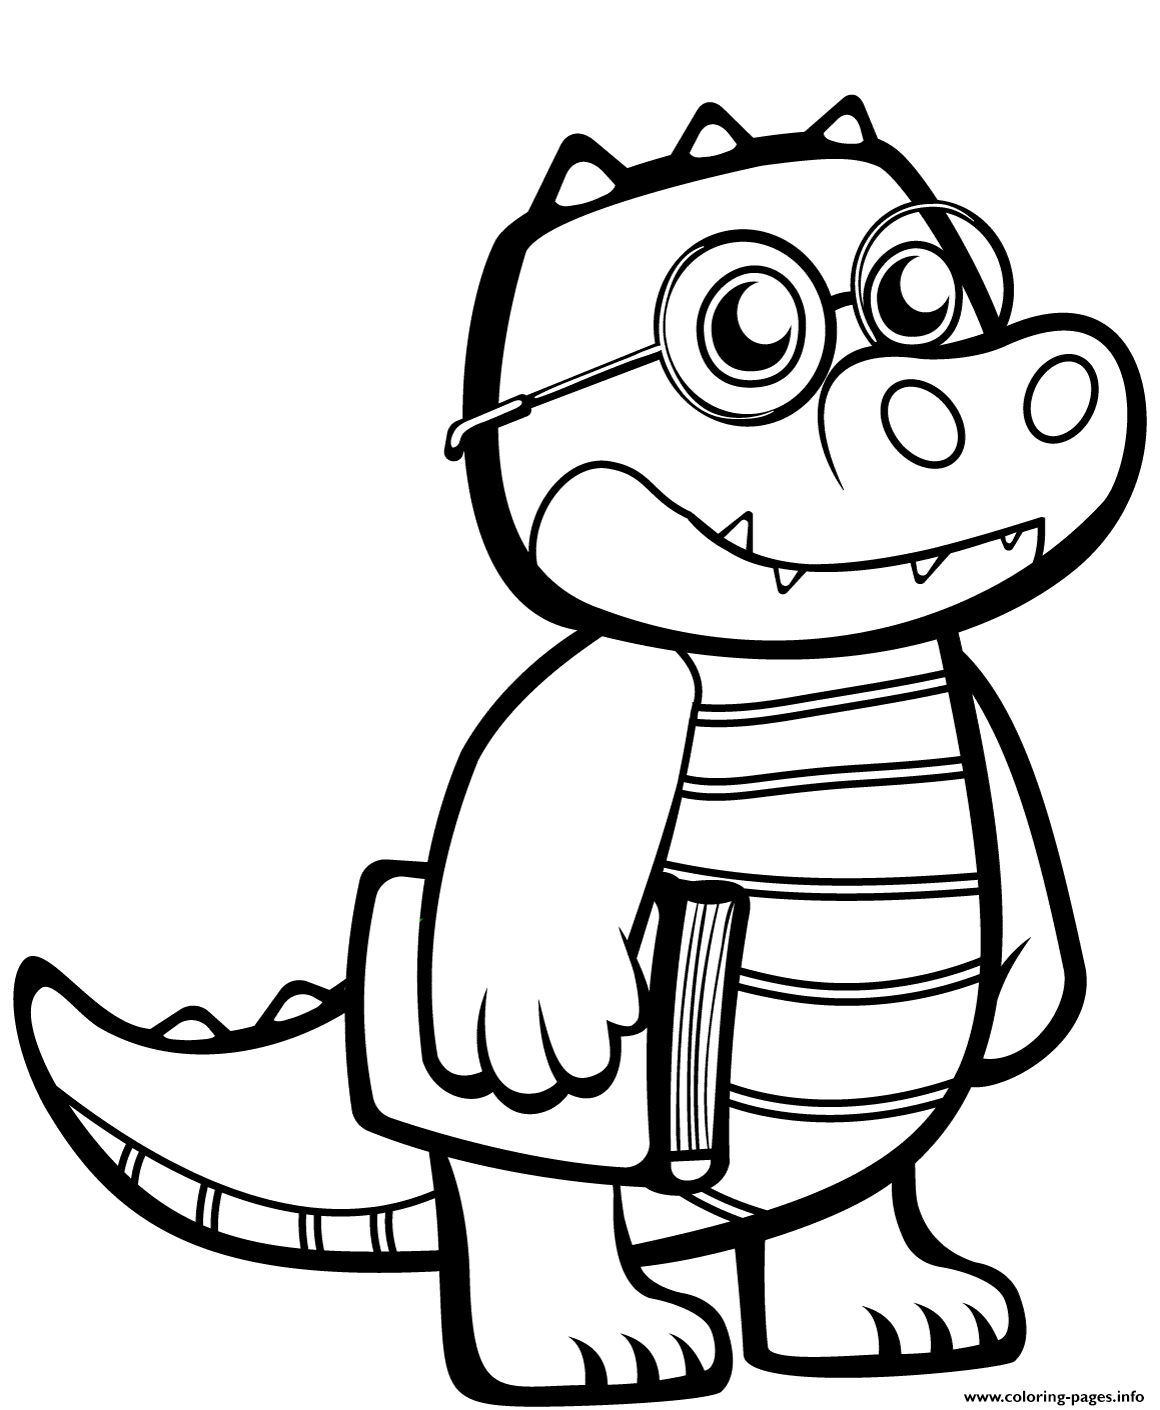 Funny Crocodile With Glasses coloring